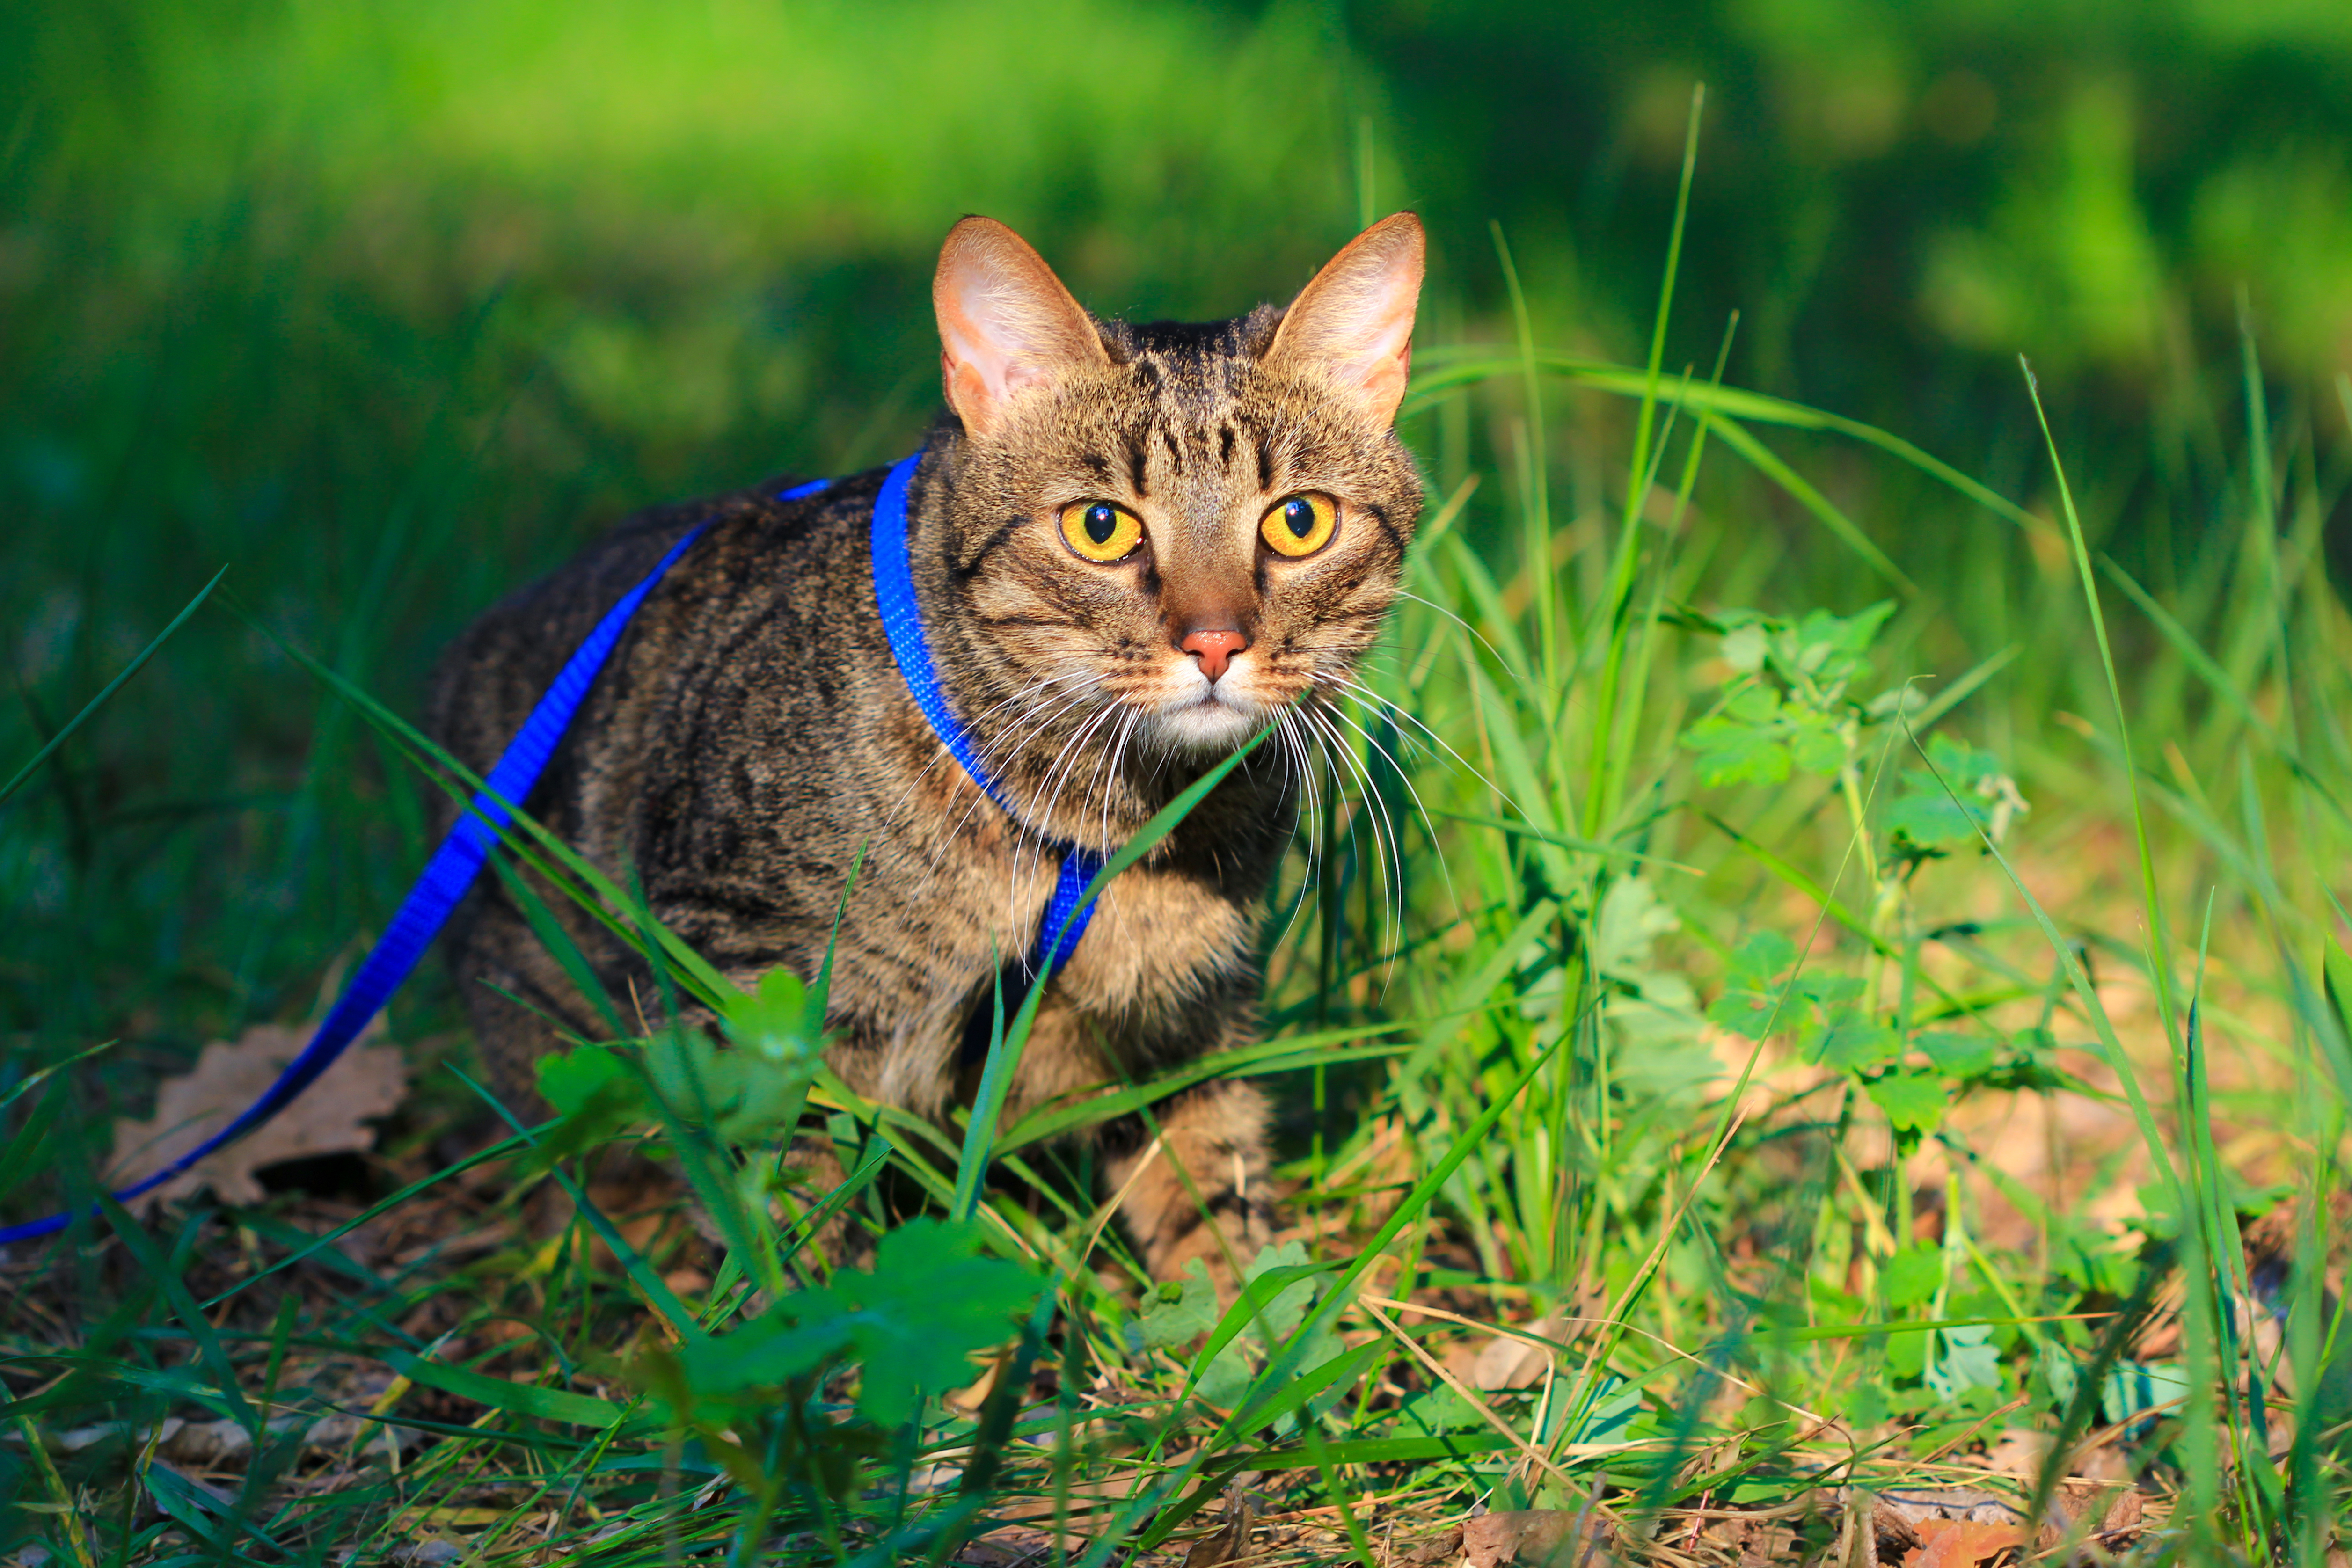 How to Take Your Cat on an Outdoor Adventure